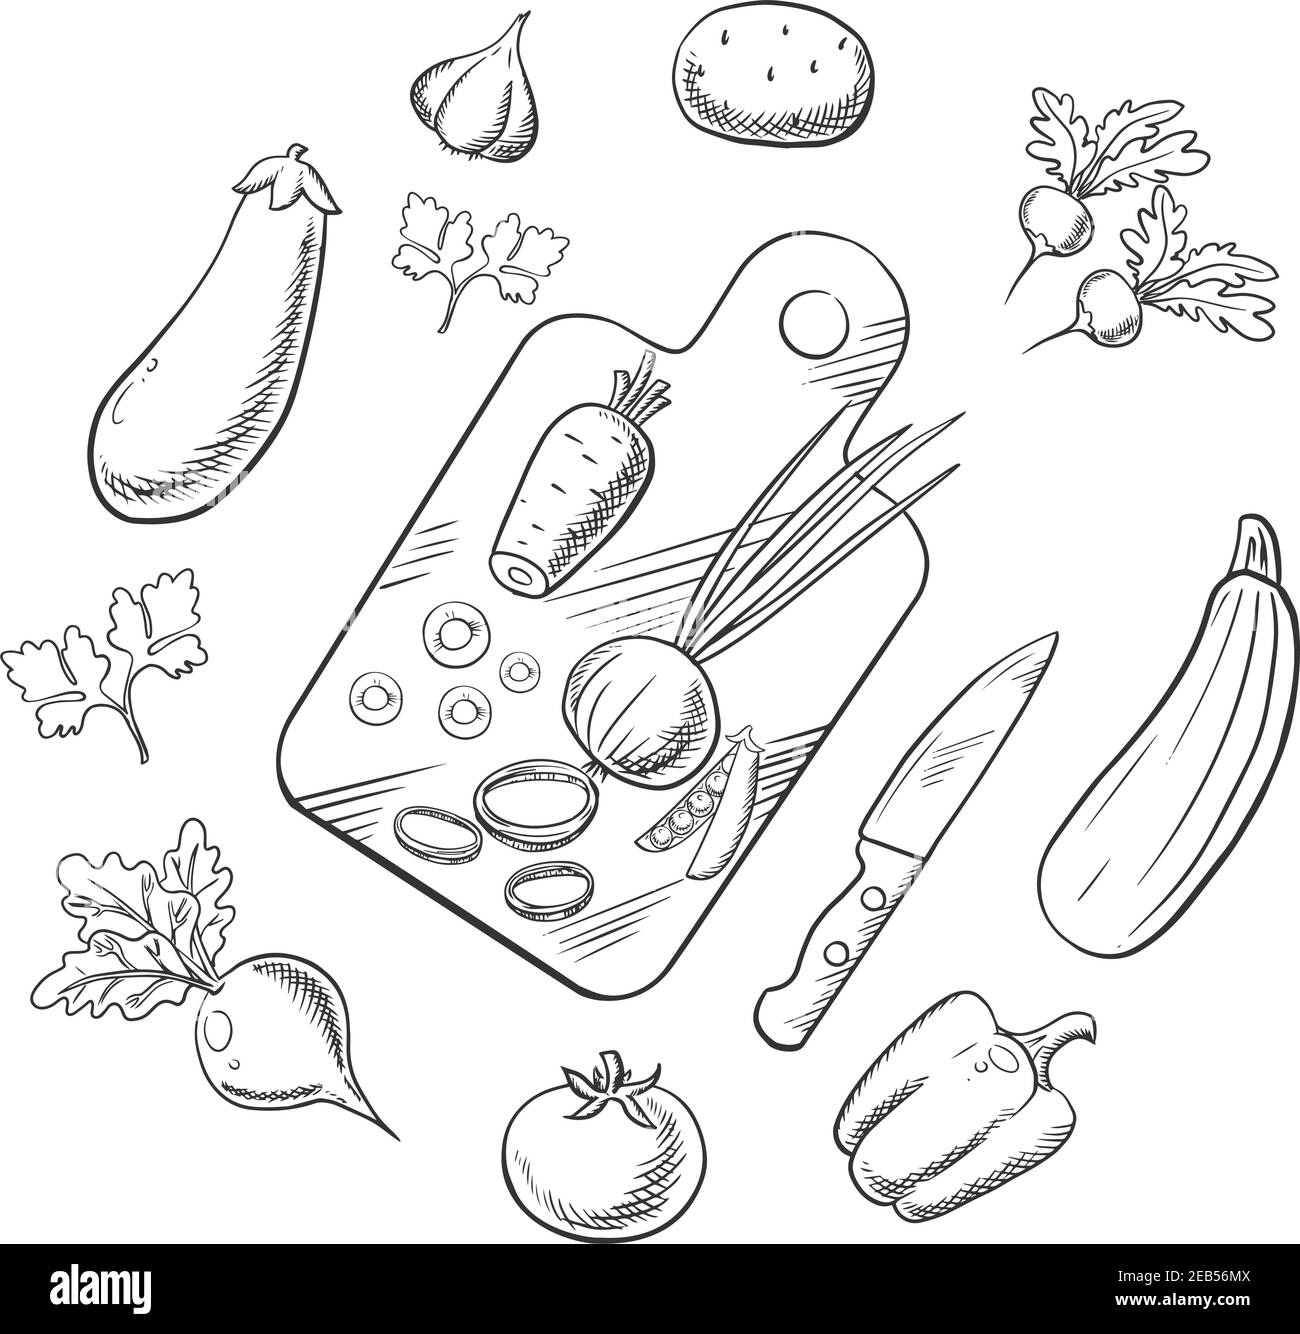 Cooking process of a vegetarian salad with knife, chopping board and tomato, carrot and pea, onion and potato, bell pepper, garlic and radish, beet an Stock Vector